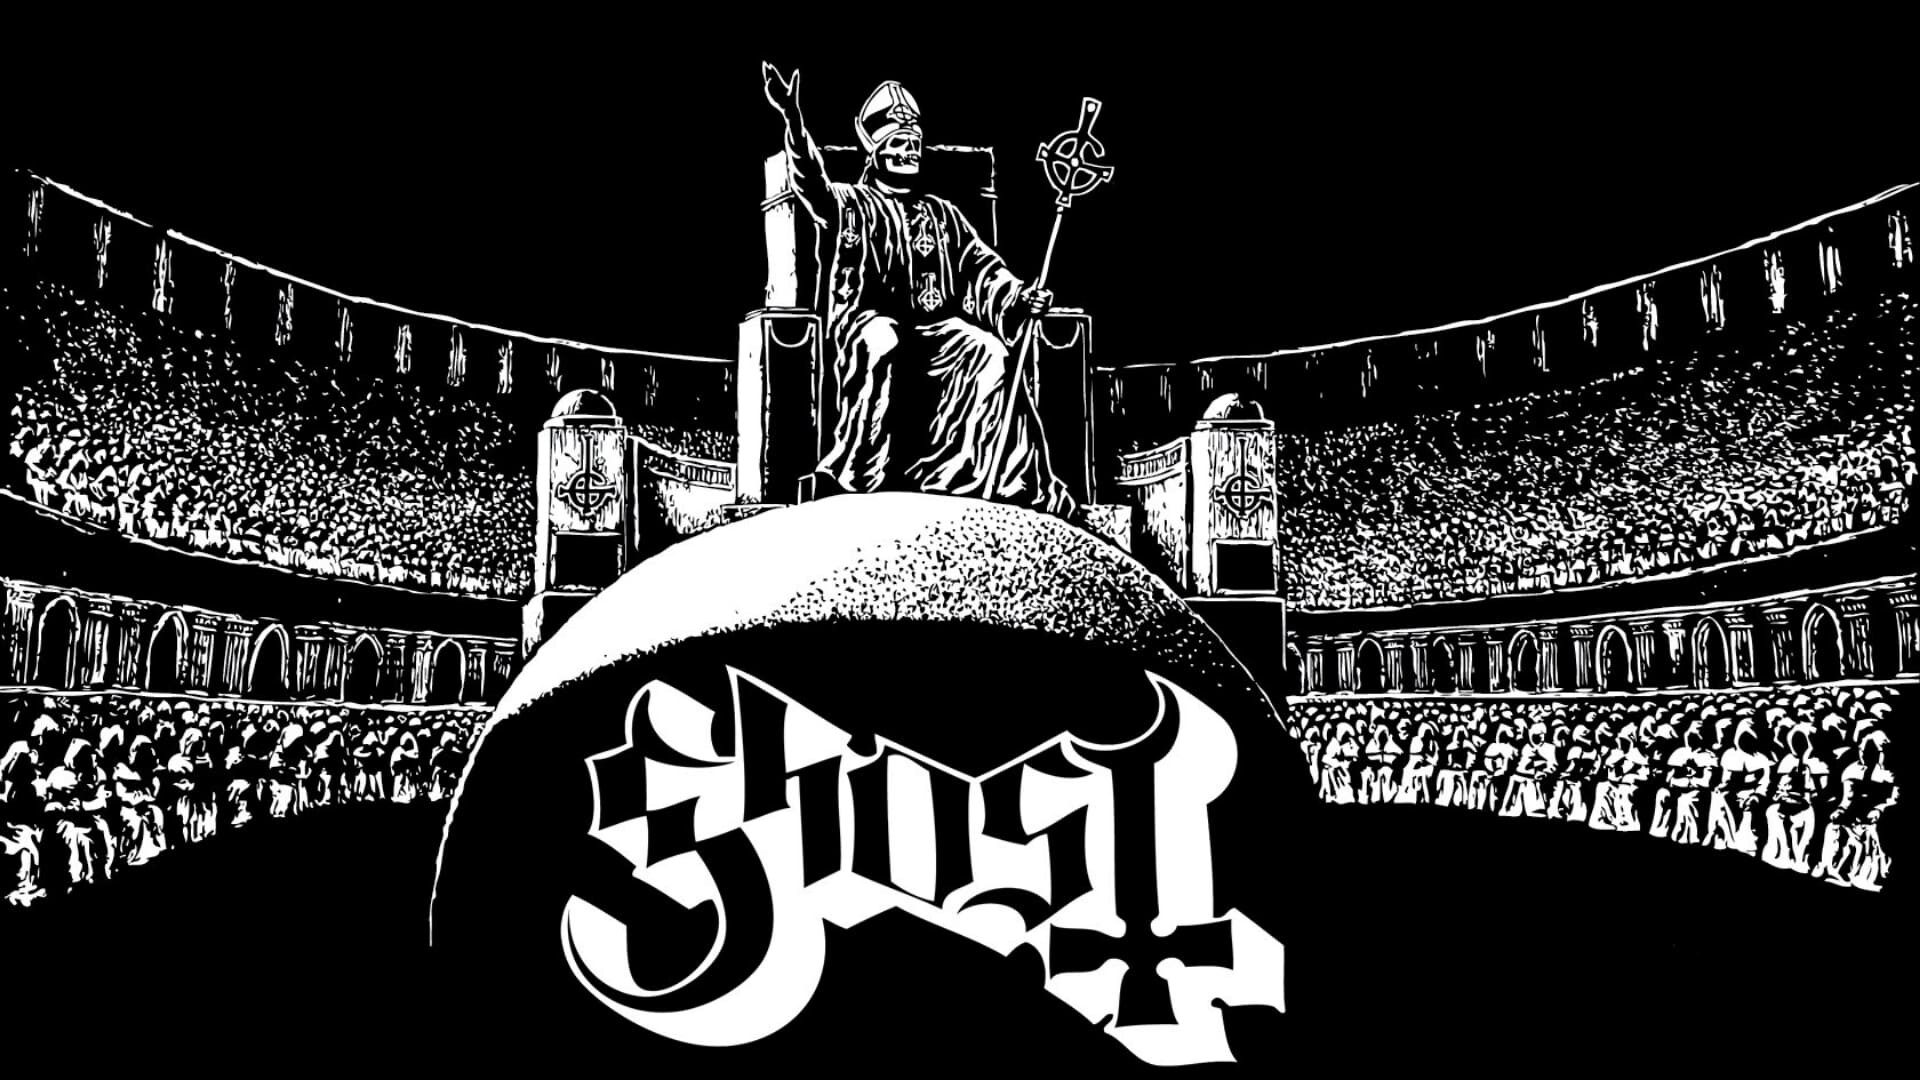 Ghost (Band): "Hunter's Moon" was released in support of the 2021 slasher film Halloween Kills. 1920x1080 Full HD Wallpaper.